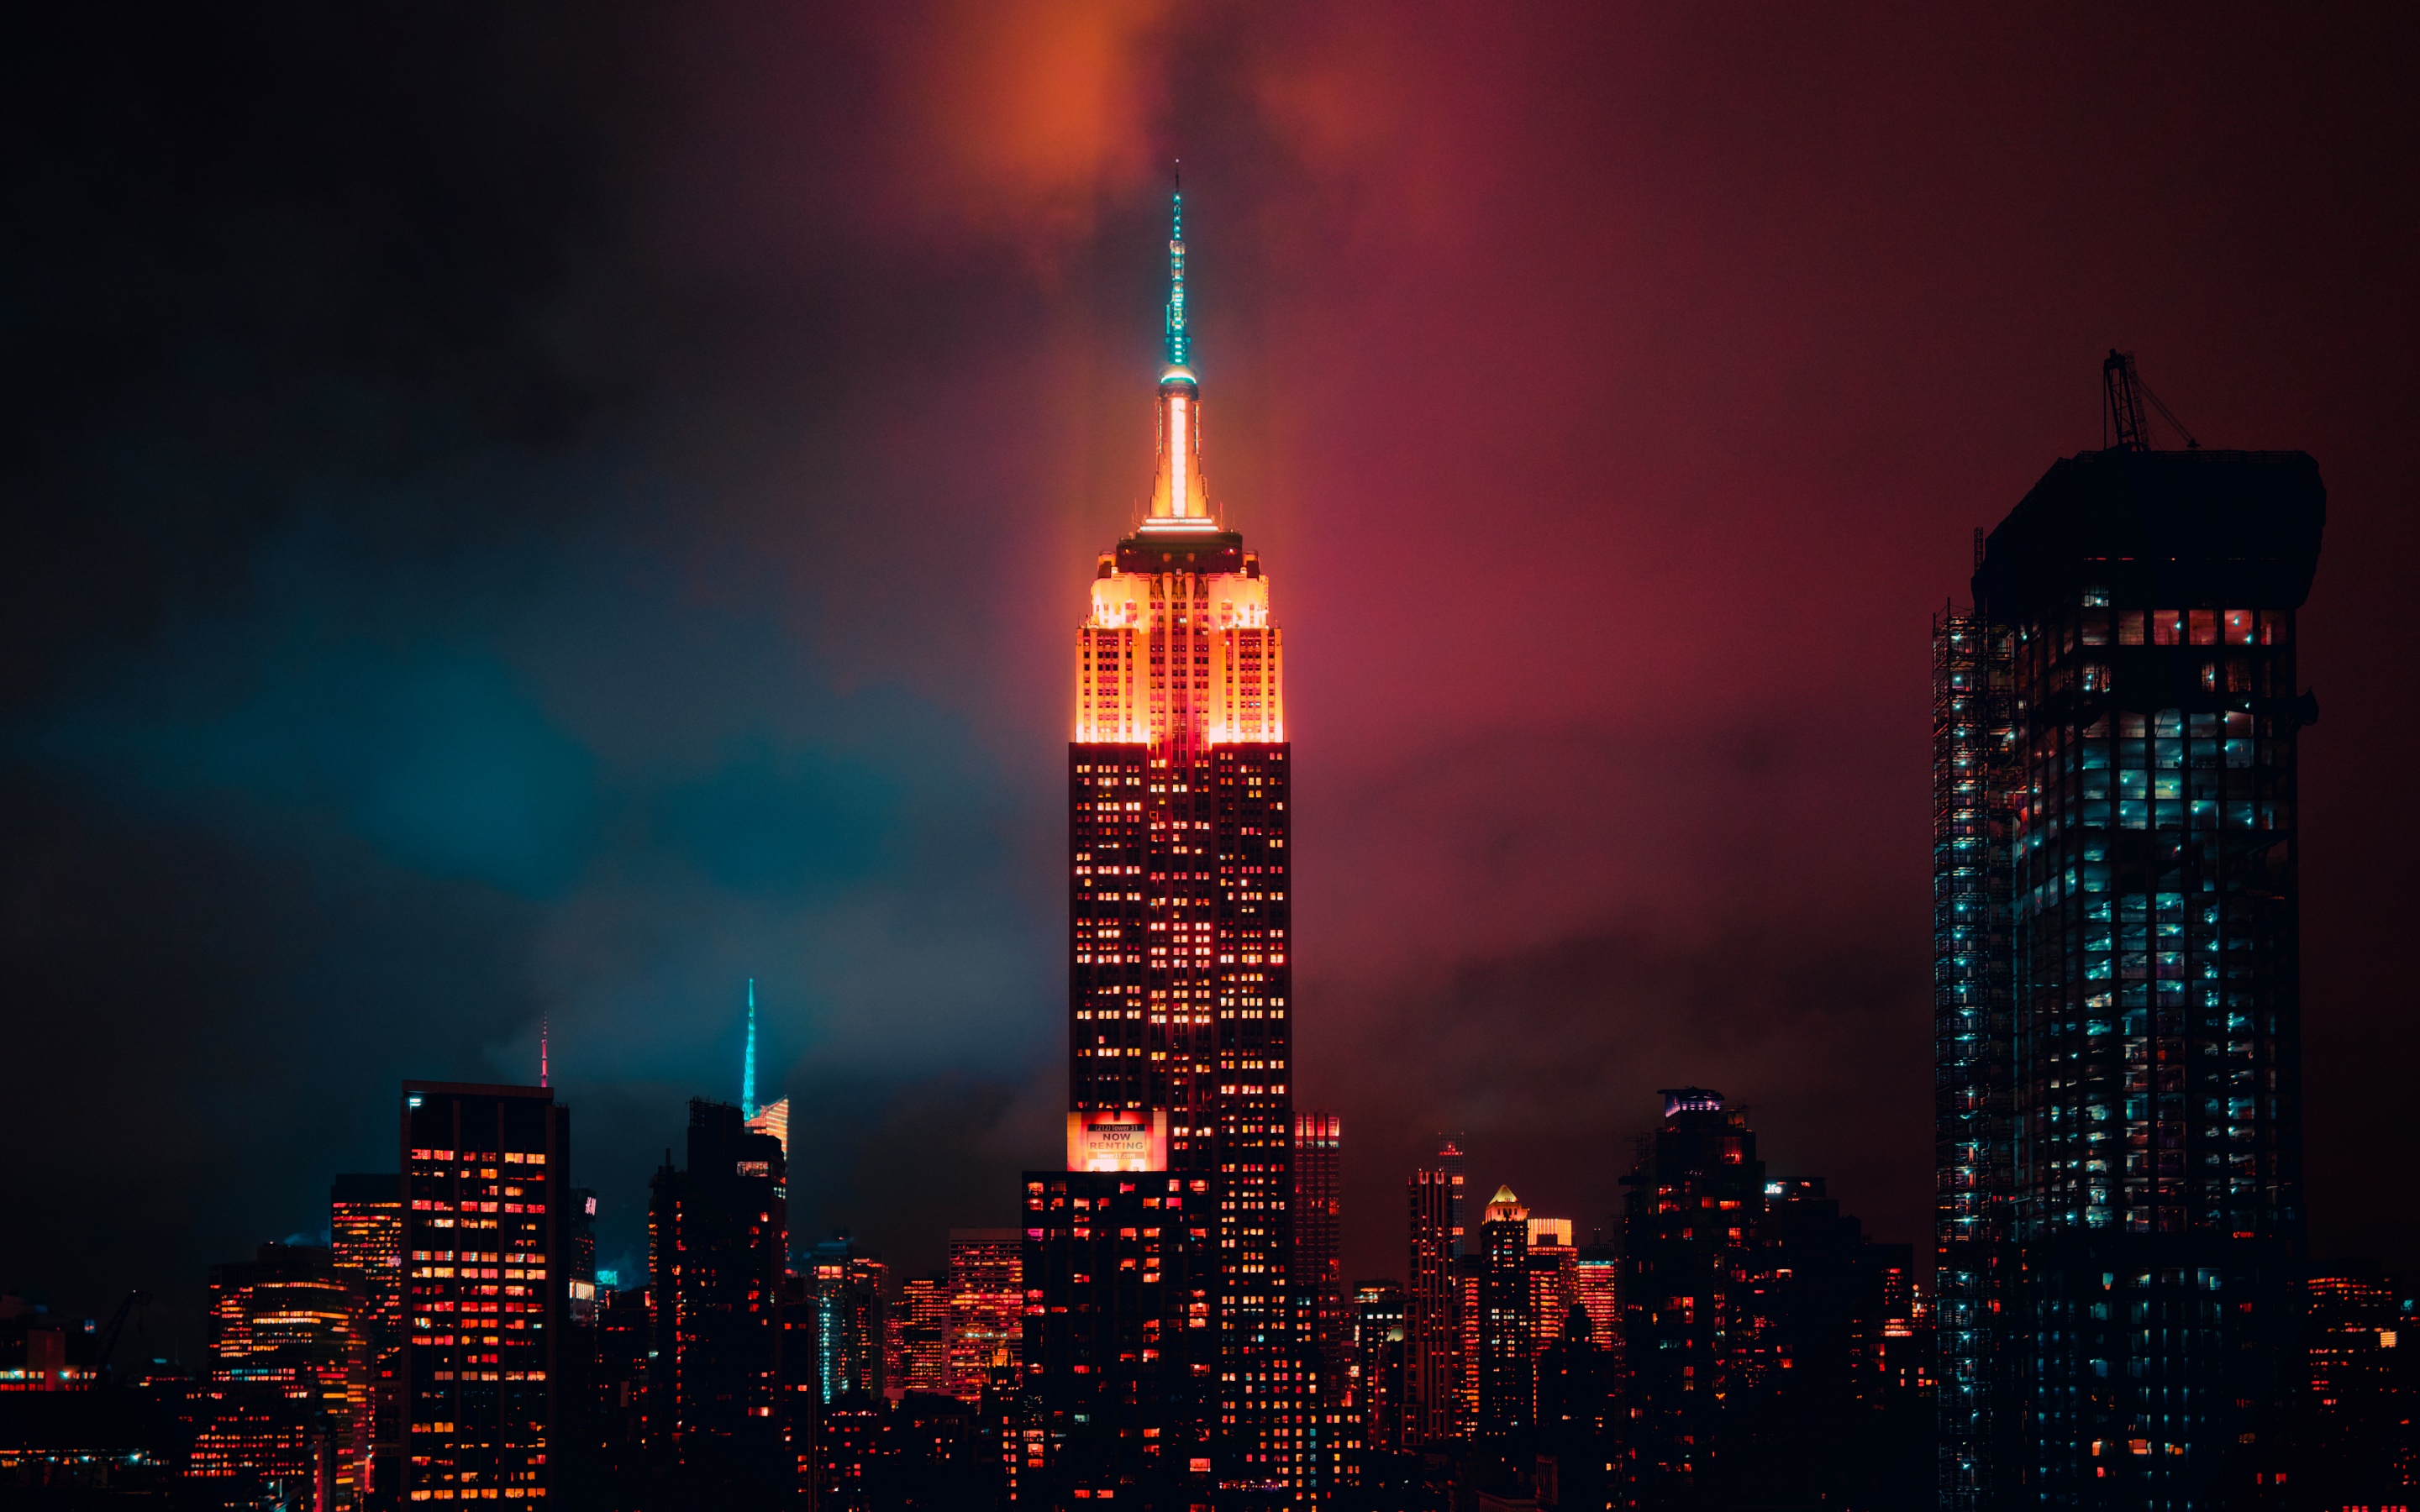 New York Empire State Building Wallpaper